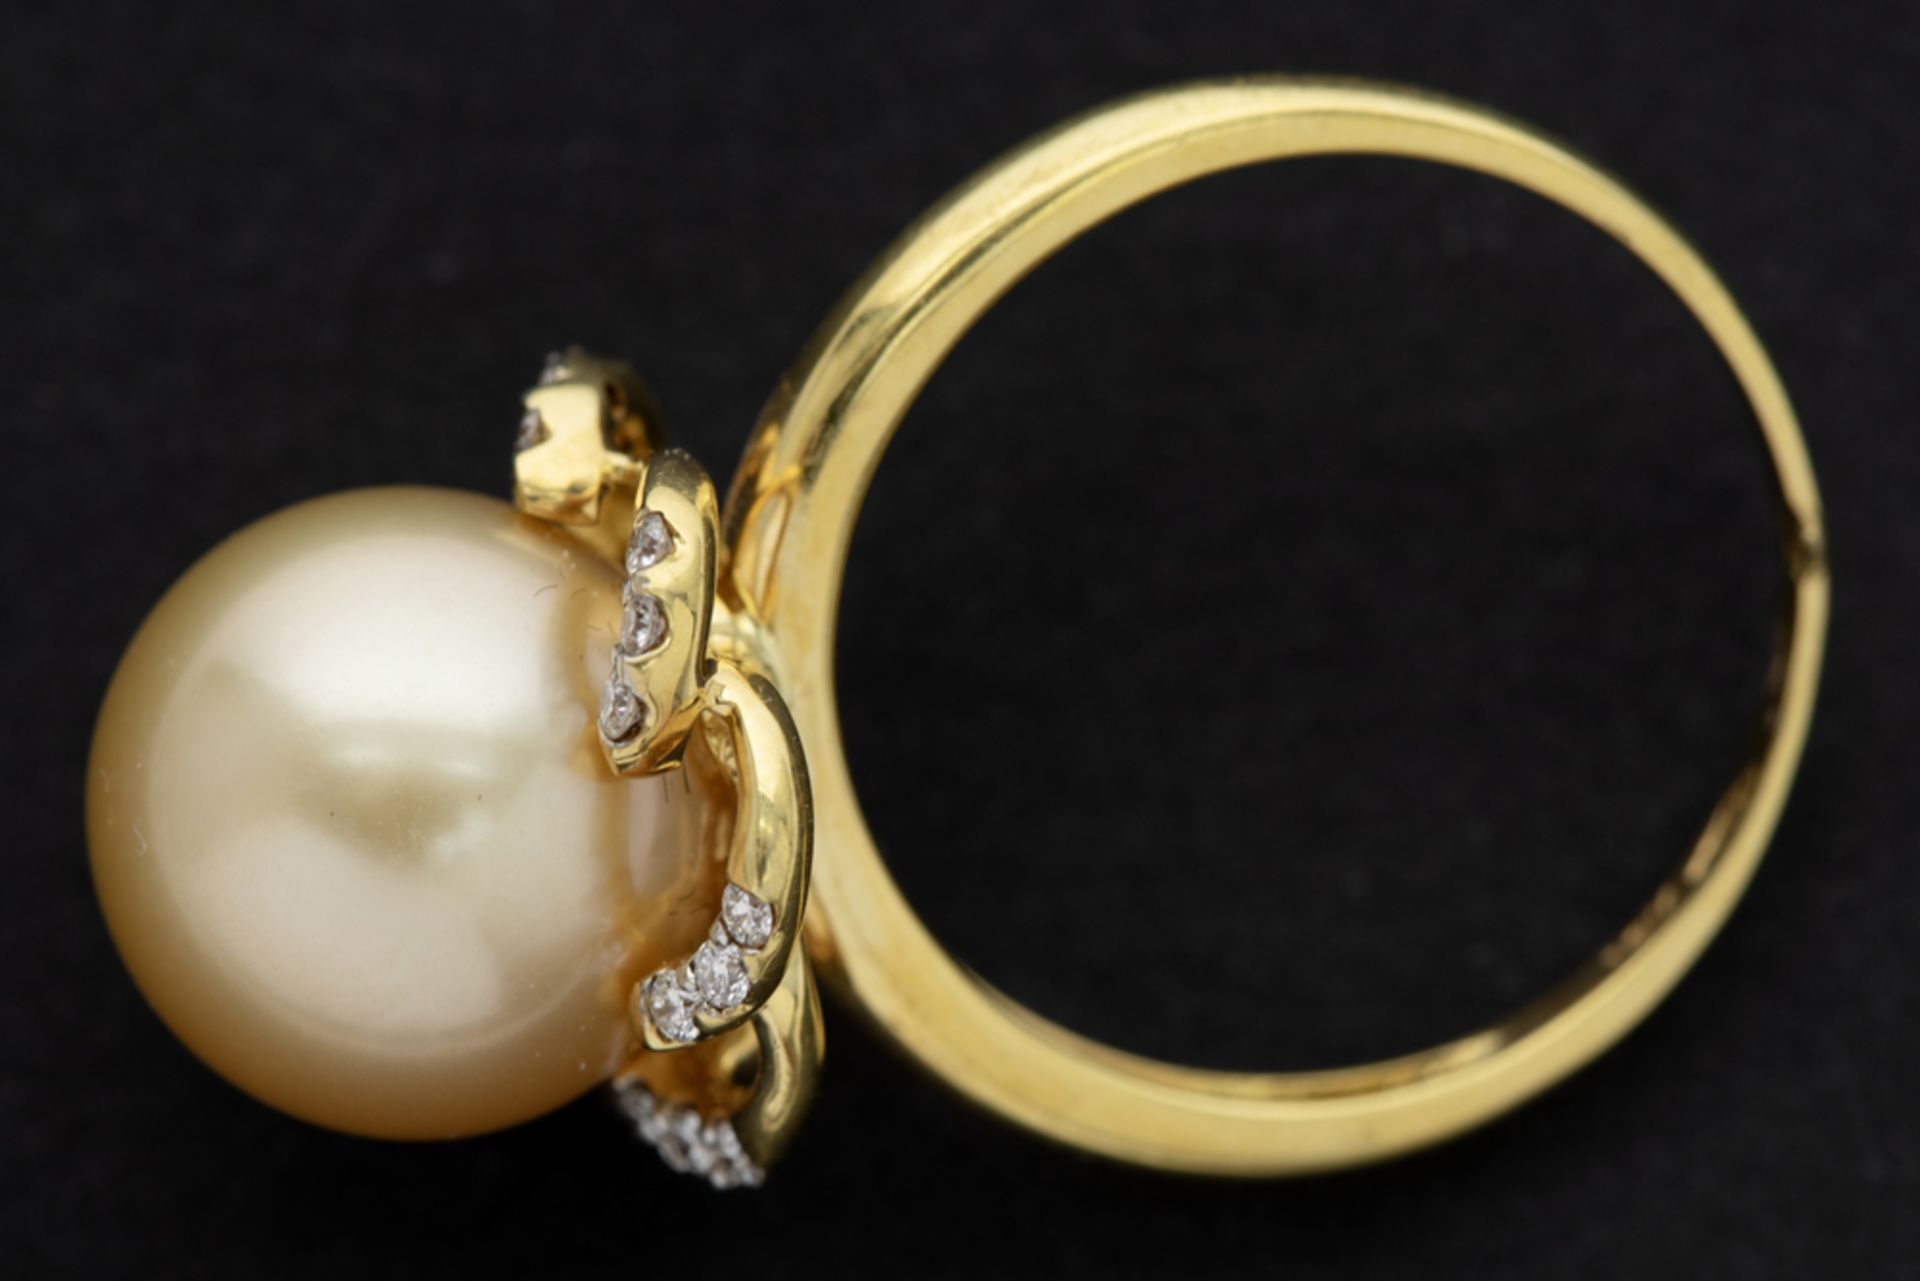 matching "Saria & C° Antwerp" ring in yellow gold (18 carat) with a typical "Saria South Sea pearl - Bild 2 aus 2